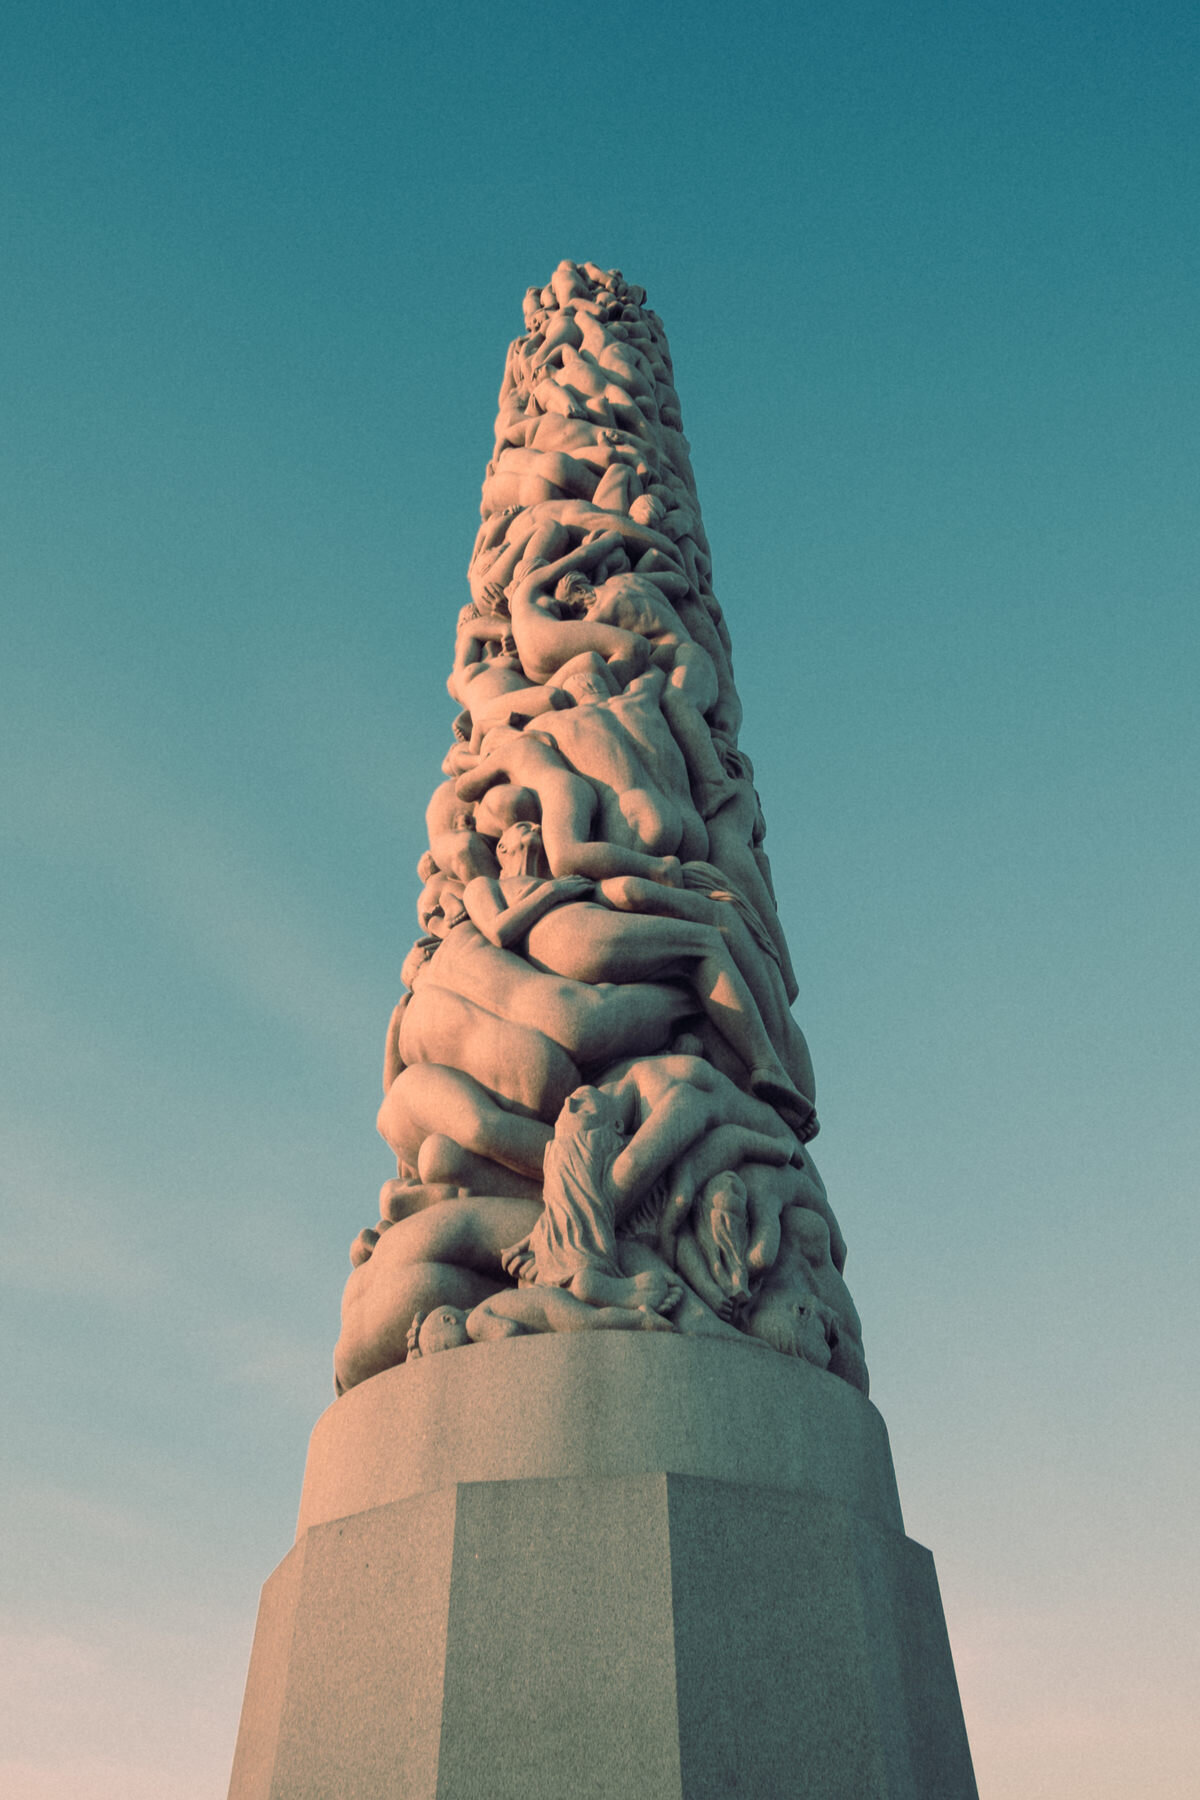 Vigeland Sculpture Park photo on Atlas Obscura by user Federicofior